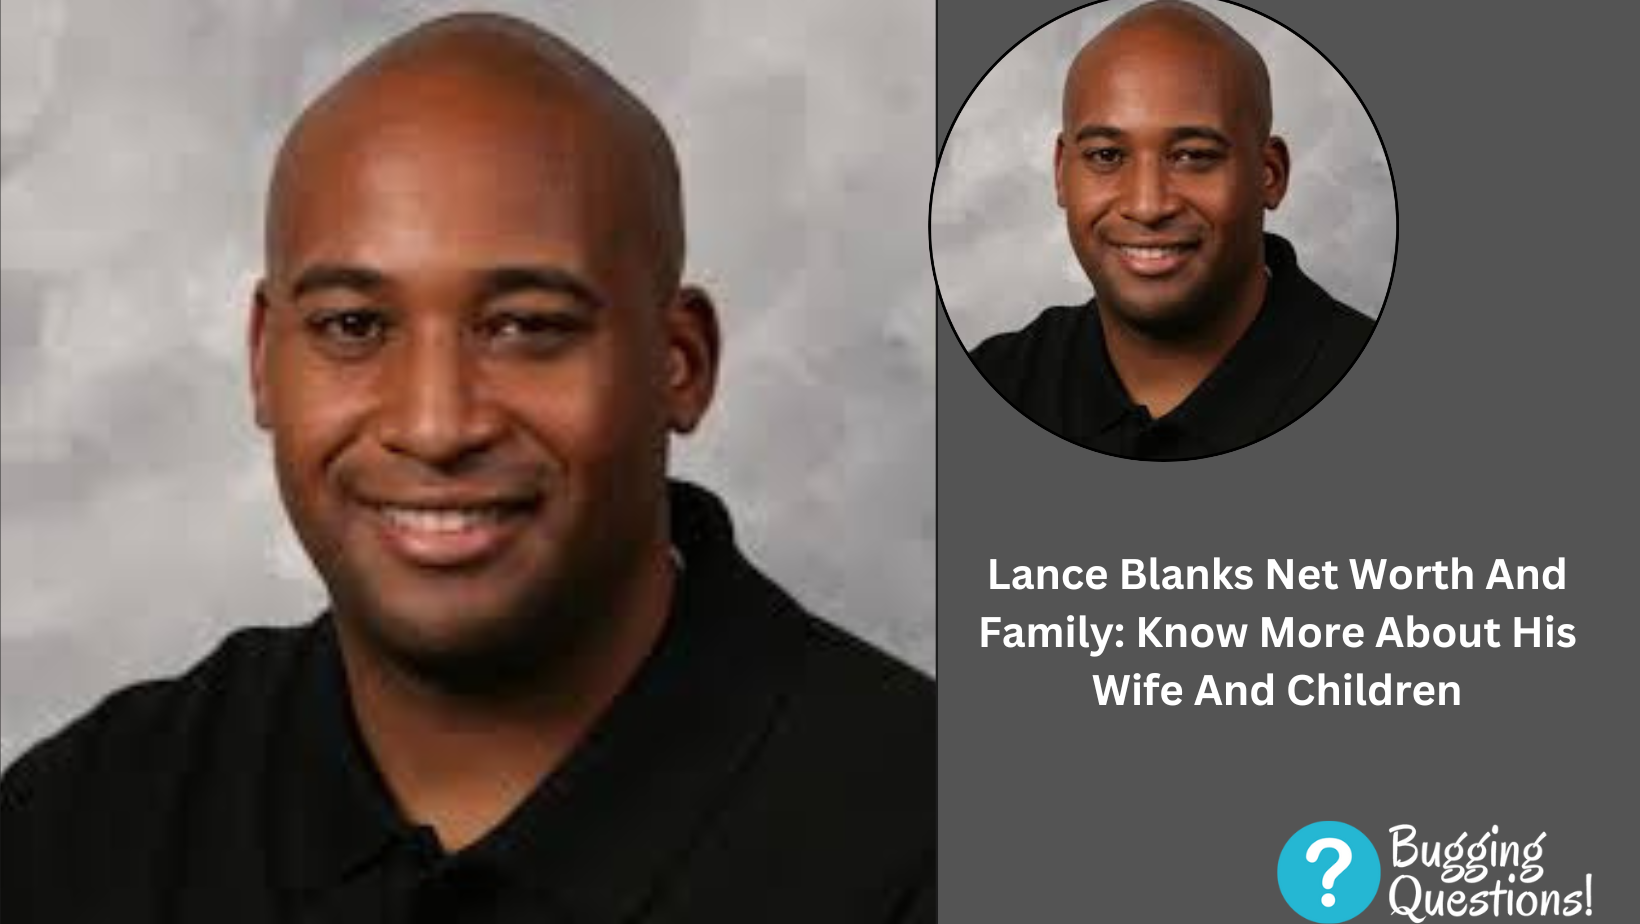 Lance Blanks Net Worth And Family